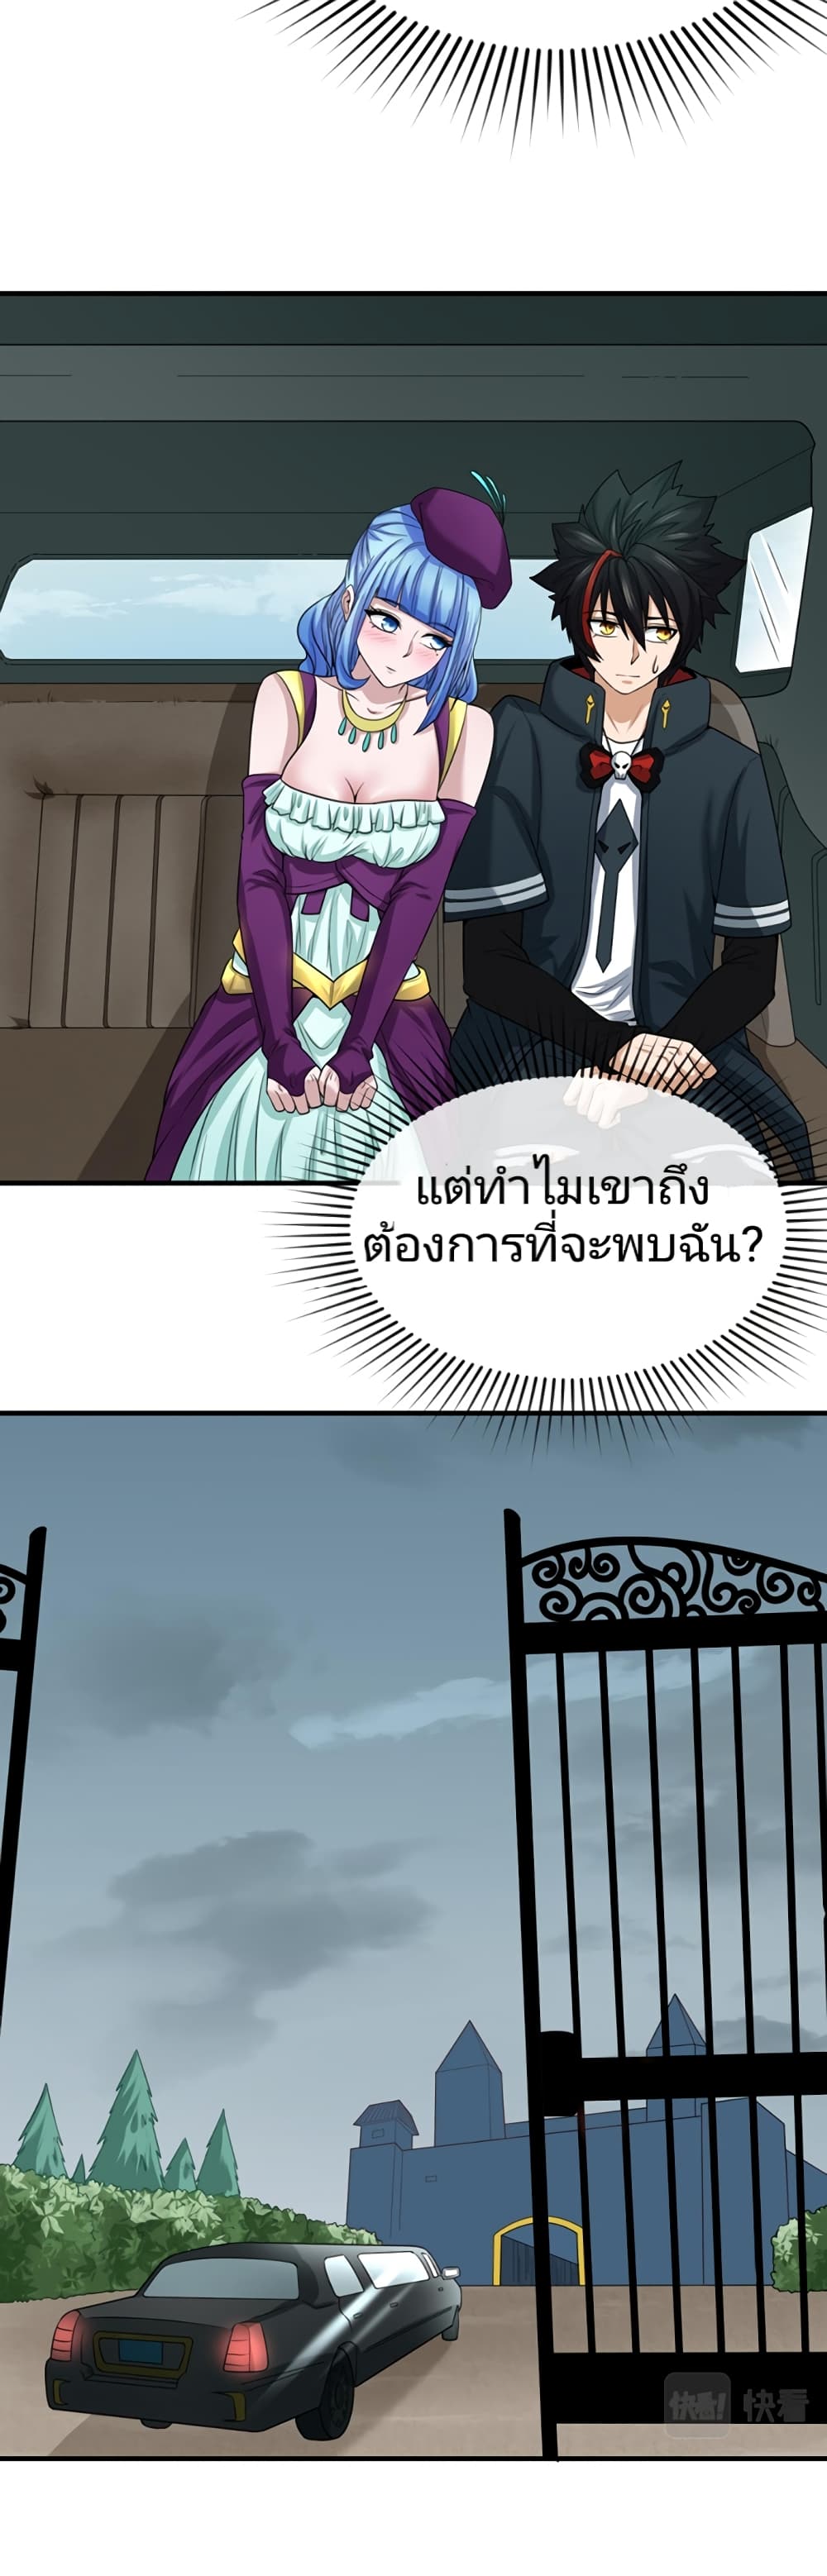 The Age of Ghost Spirits à¸à¸­à¸à¸à¸µà¹ 39 (26)